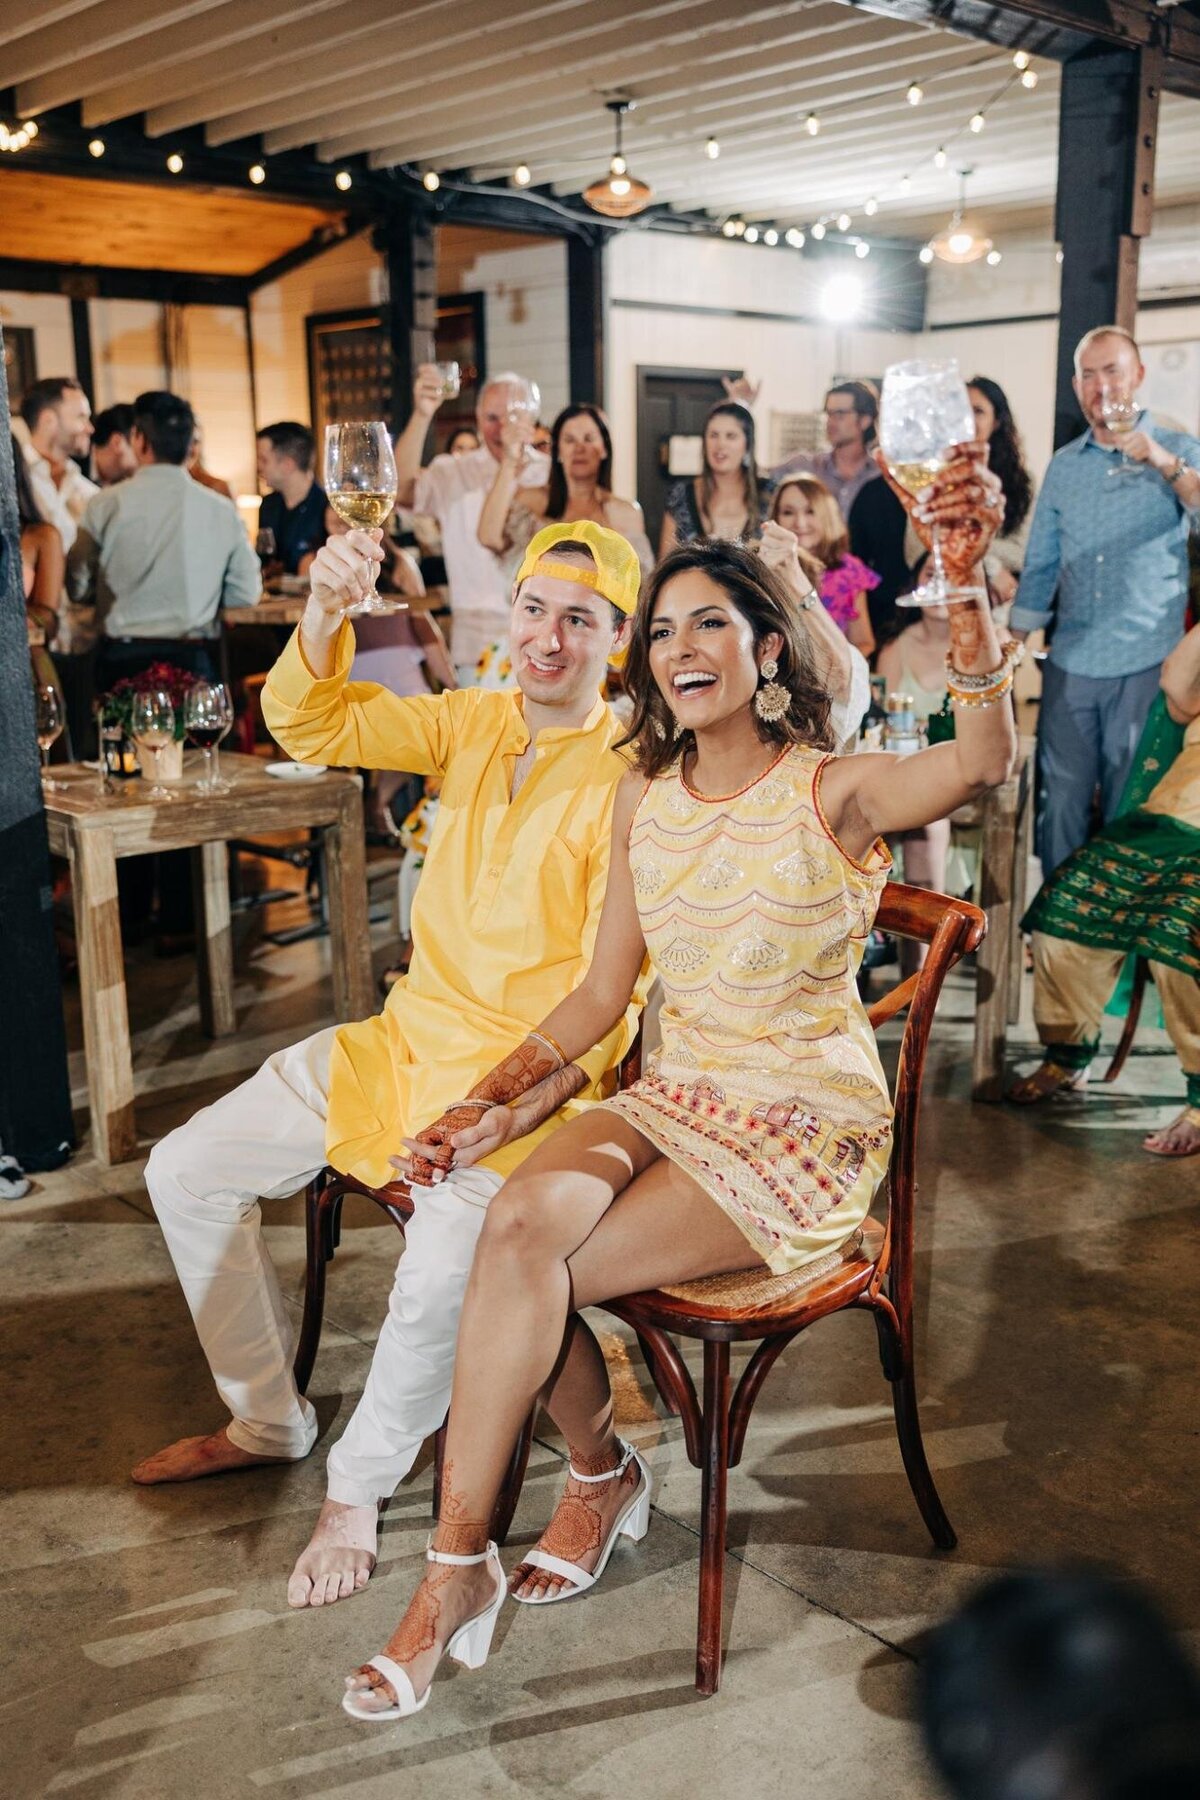 A couple in traditional attire sitting and raising glasses at a lively event with guests in the background.